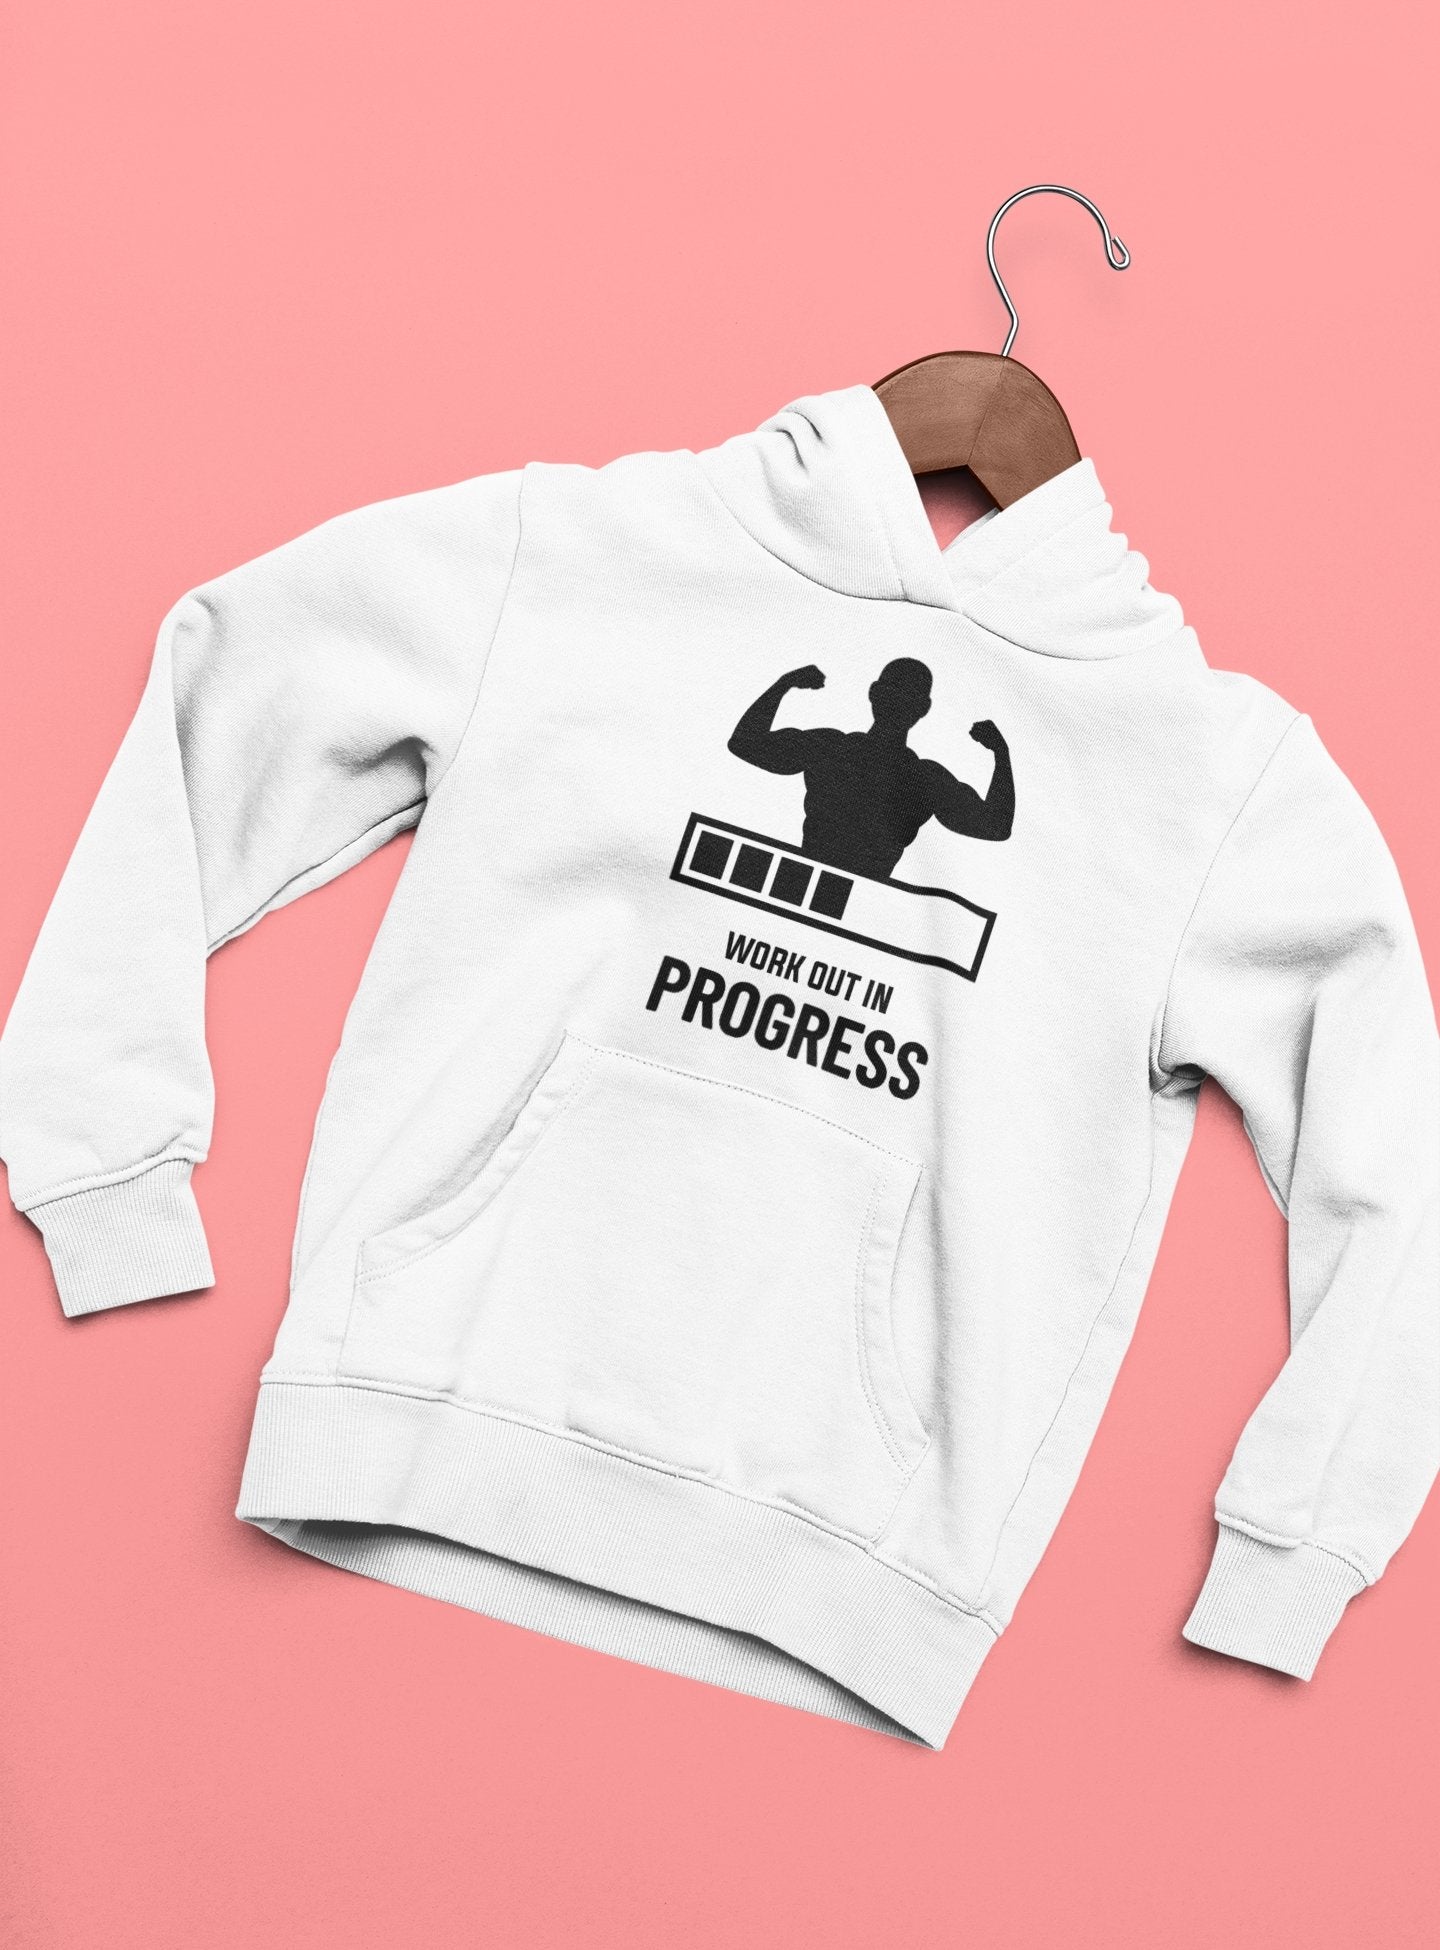 Work Out In Progress Typography Hoodies for Women-FunkyTradition - Funky Tees Club